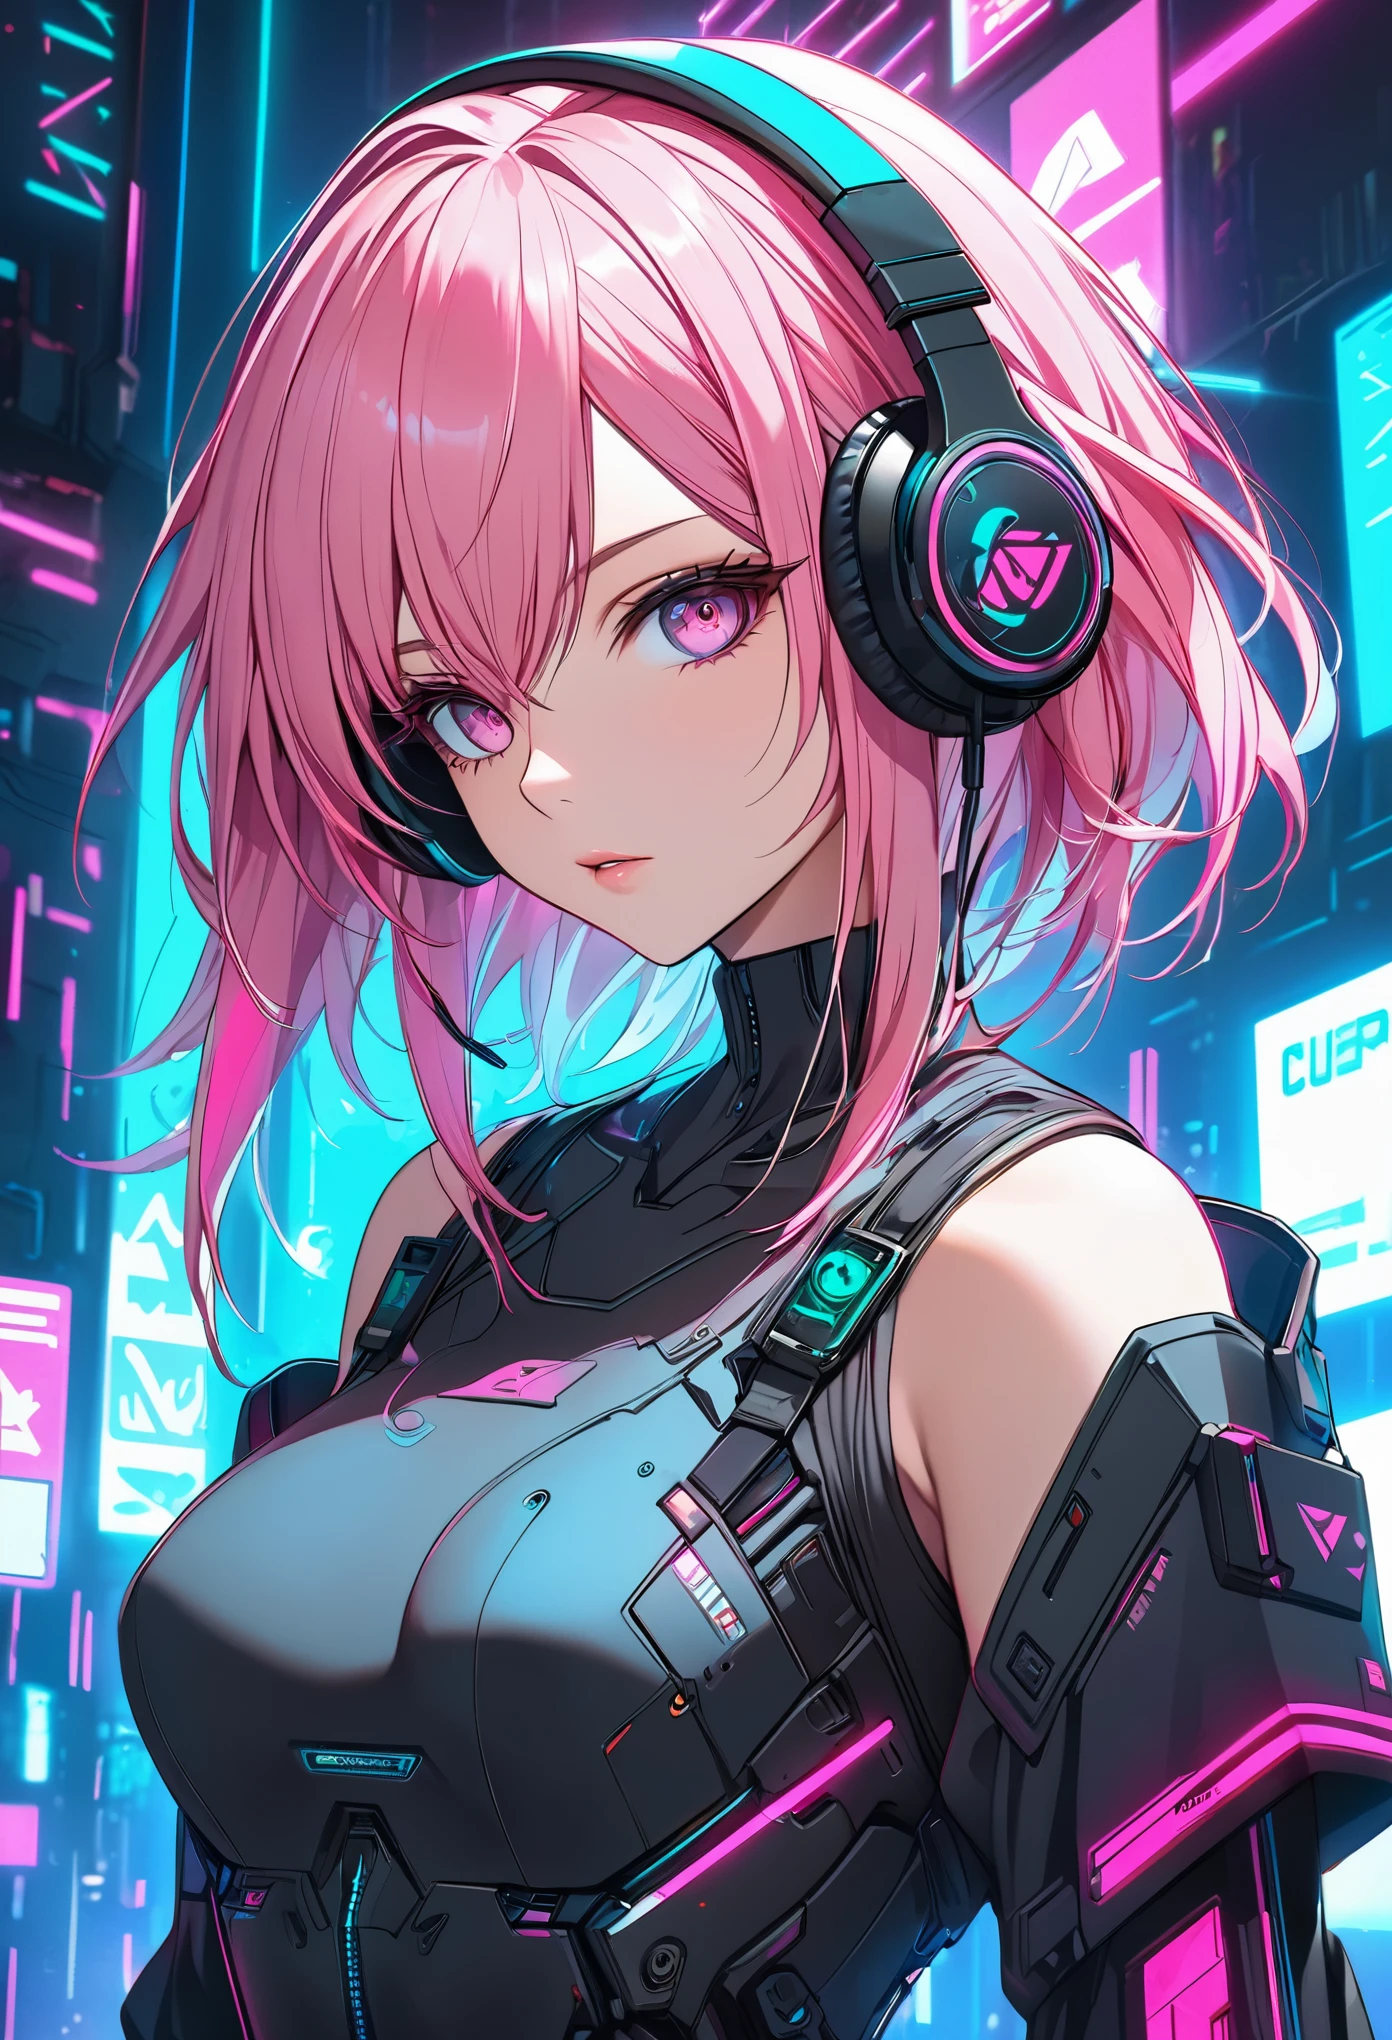 anime girl with pink hair and headphones in front of a neon background, cyberpunk anime girl, best anime 4k konachan wallpaper, digital cyberpunk anime art, anime cyberpunk art, digital cyberpunk - anime art, female cyberpunk anime girl, cyberpunk anime girl mech, anime style 4 k, perfect android girl, cyberpunk anime art, modern cyberpunk anime, anime cyberpunk, nightcore
